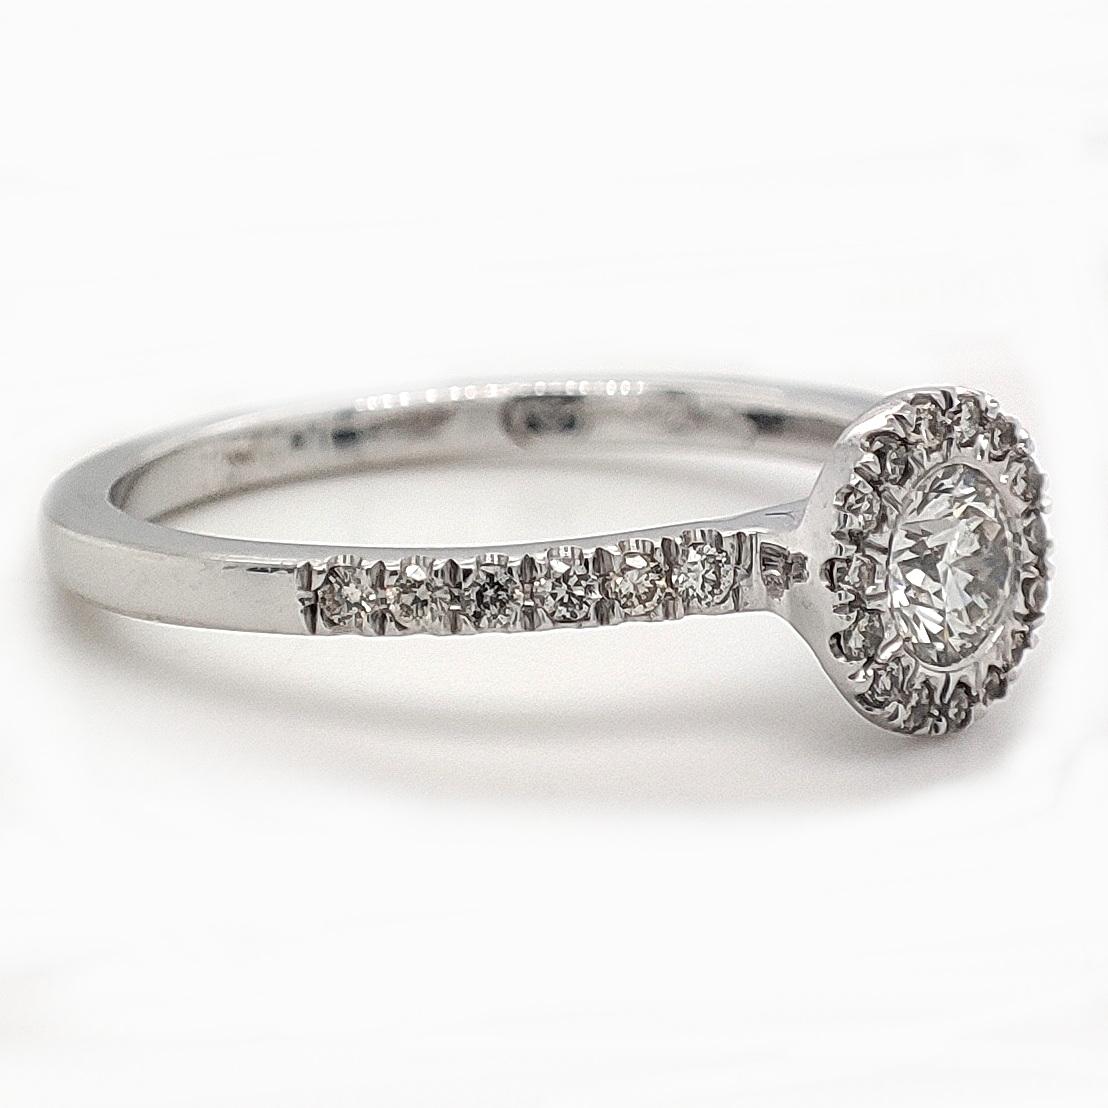 FOR US CUSTOMER NO VAT!

Elevate your style with the enchanting allure of this 0.42CTW Halo Diamond Ring in 14K White Gold. The centerpiece boasts a sparkling 0.24CT diamond with a clarity of SI2, encircled by 27 stones totaling 0.18CT in a range of